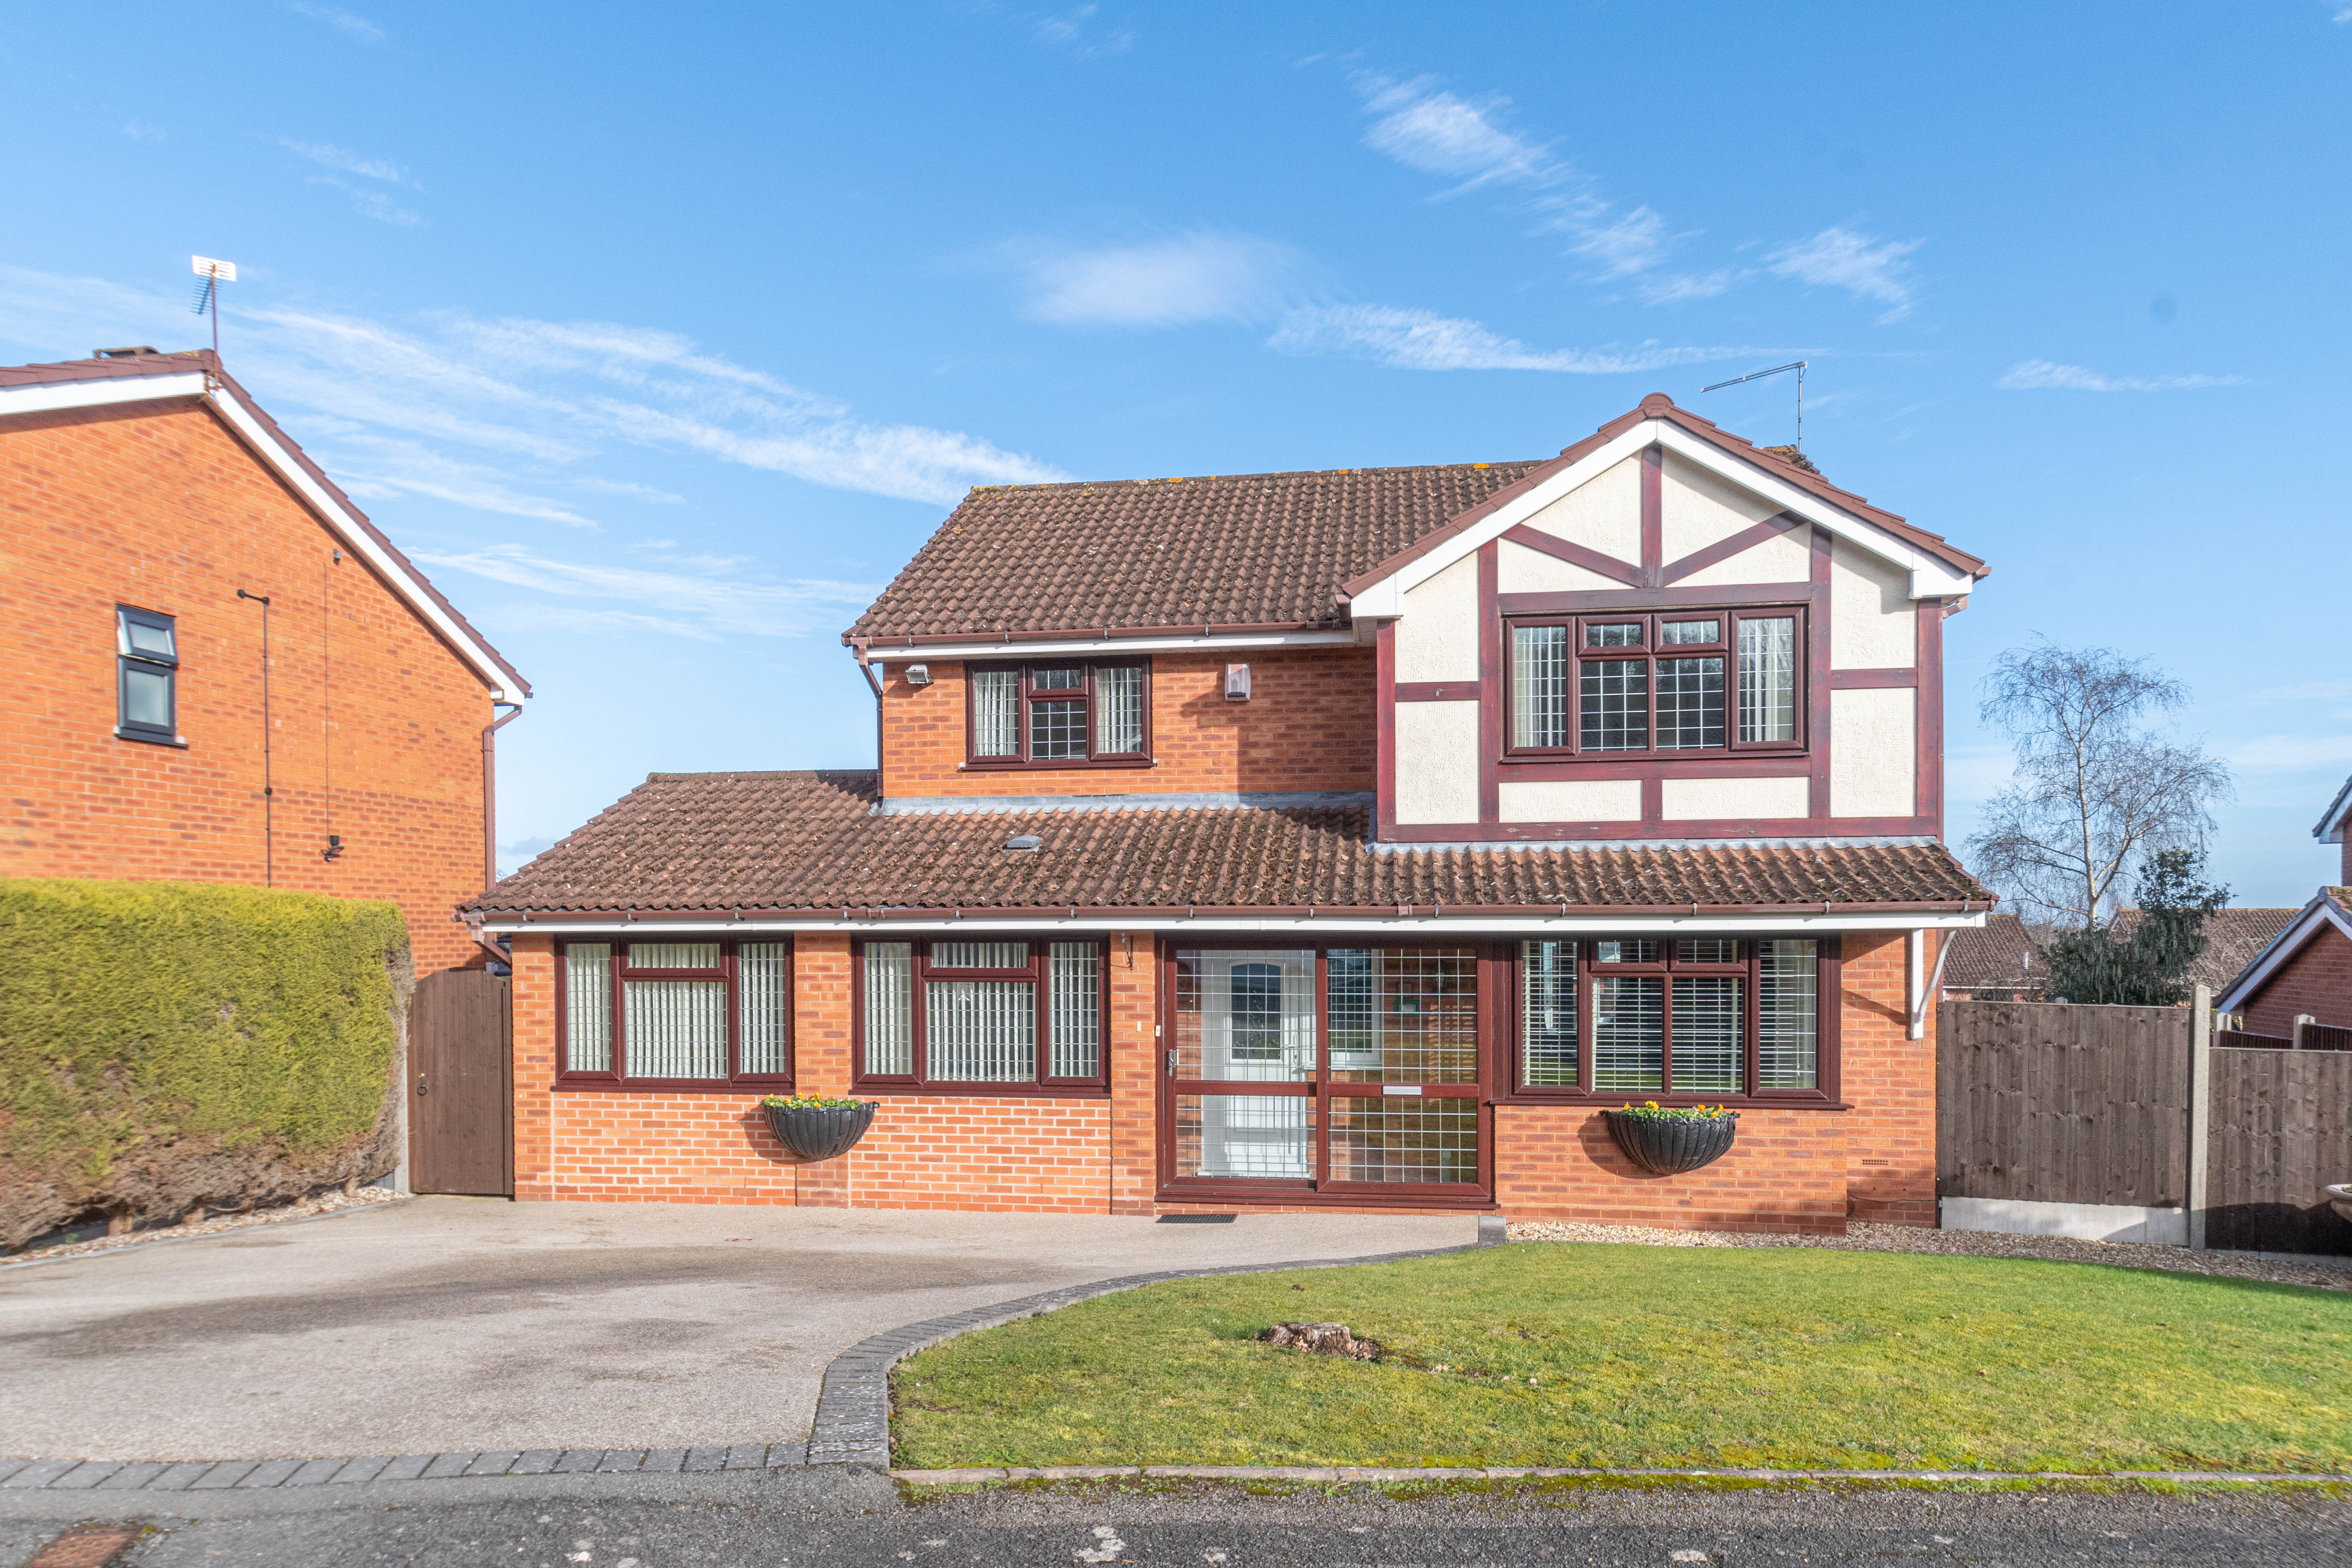 4 bed house for sale in Hollowfields Close, Redditch - Property Image 1